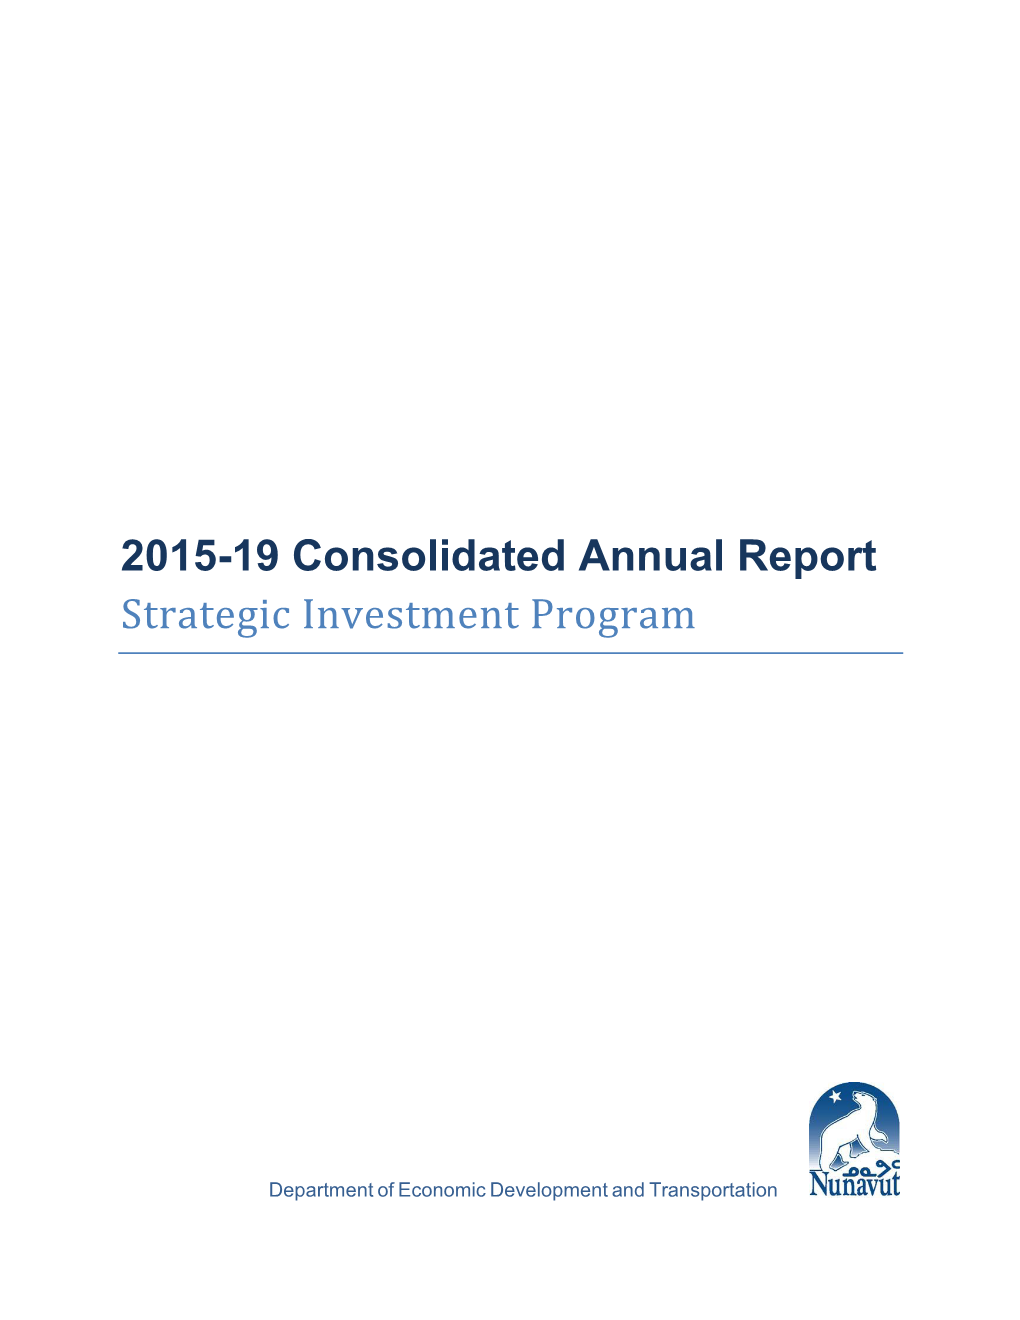 2015-19 Consolidated Annual Report Strategic Investment Program